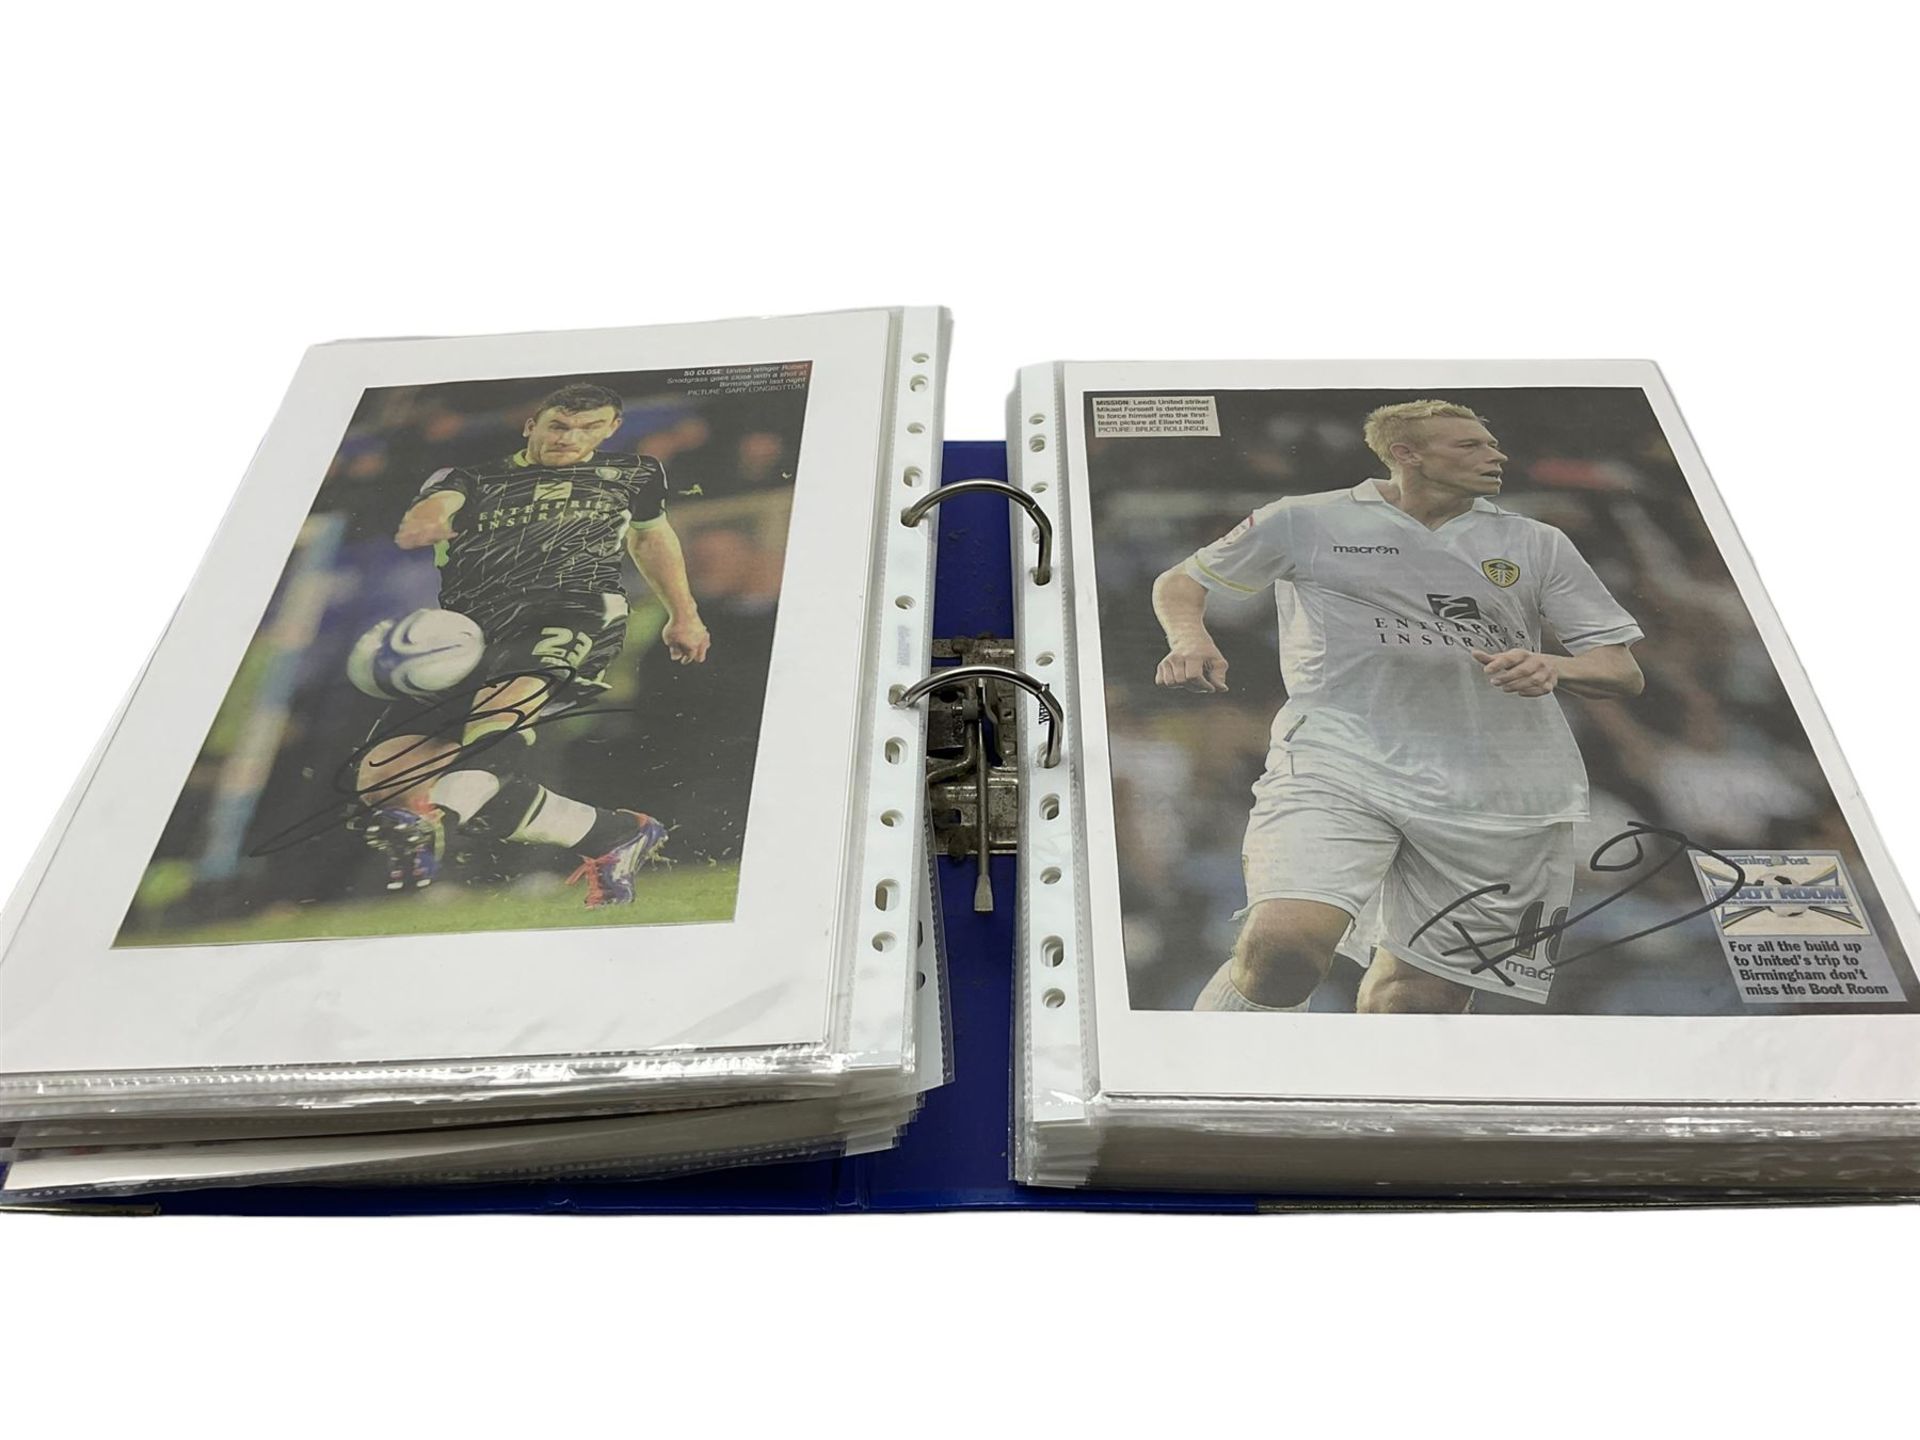 Leeds United football club - various autographs and signatures including Luciano Becchio - Image 7 of 10